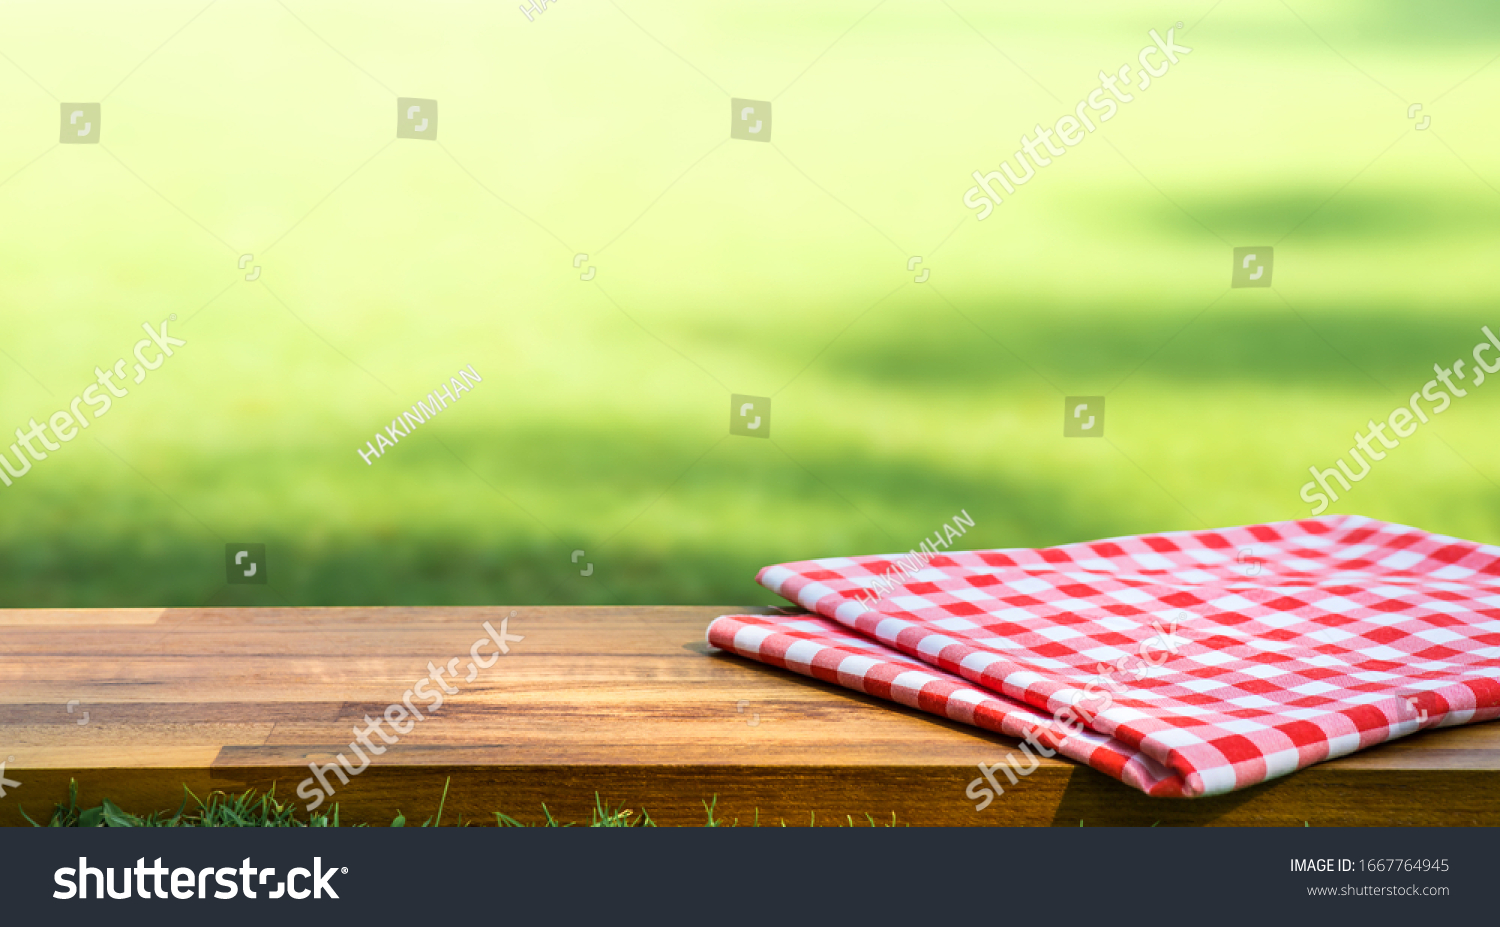 Red checked tablecloth on wood with blur green courtyard background.Summer and picnic concepts.Design for key visual food and drink products.no people #1667764945